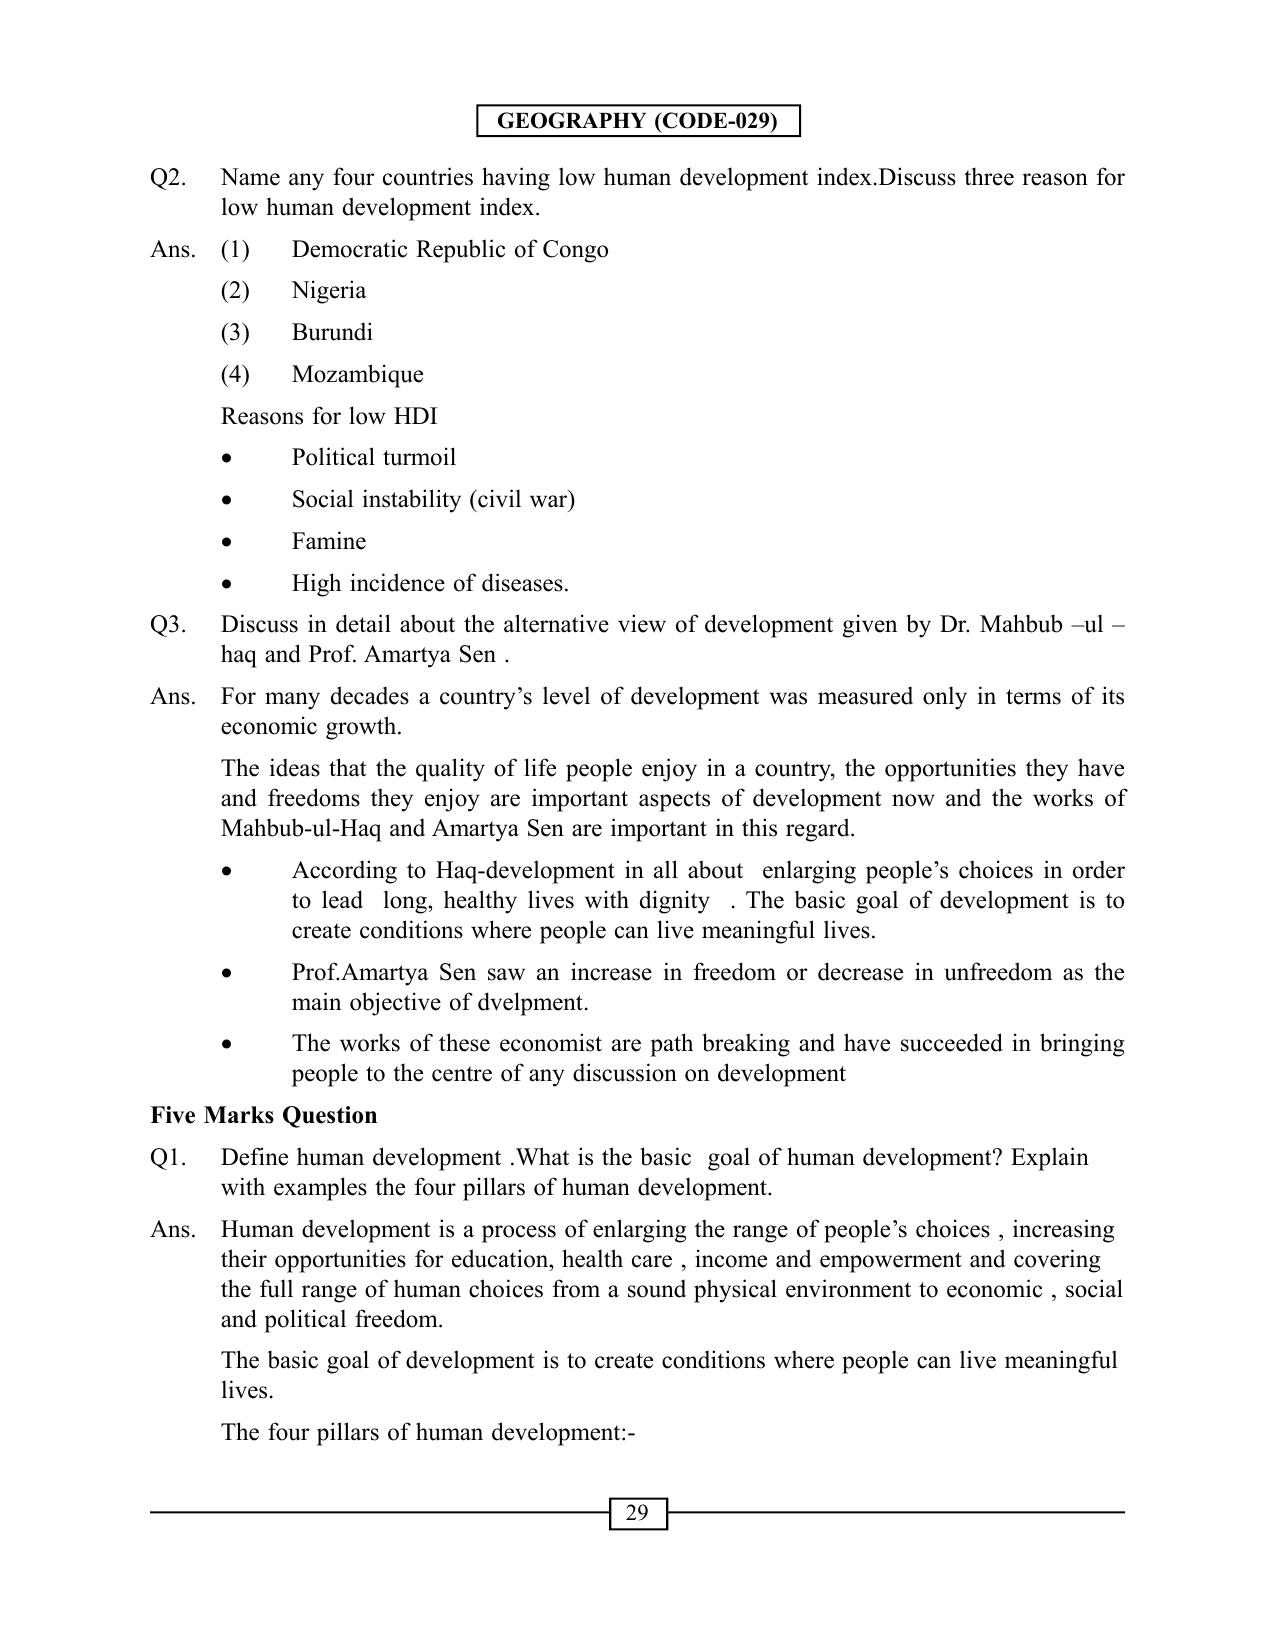 CBSE Worksheets for Class 12 Geography Human Development - Page 3